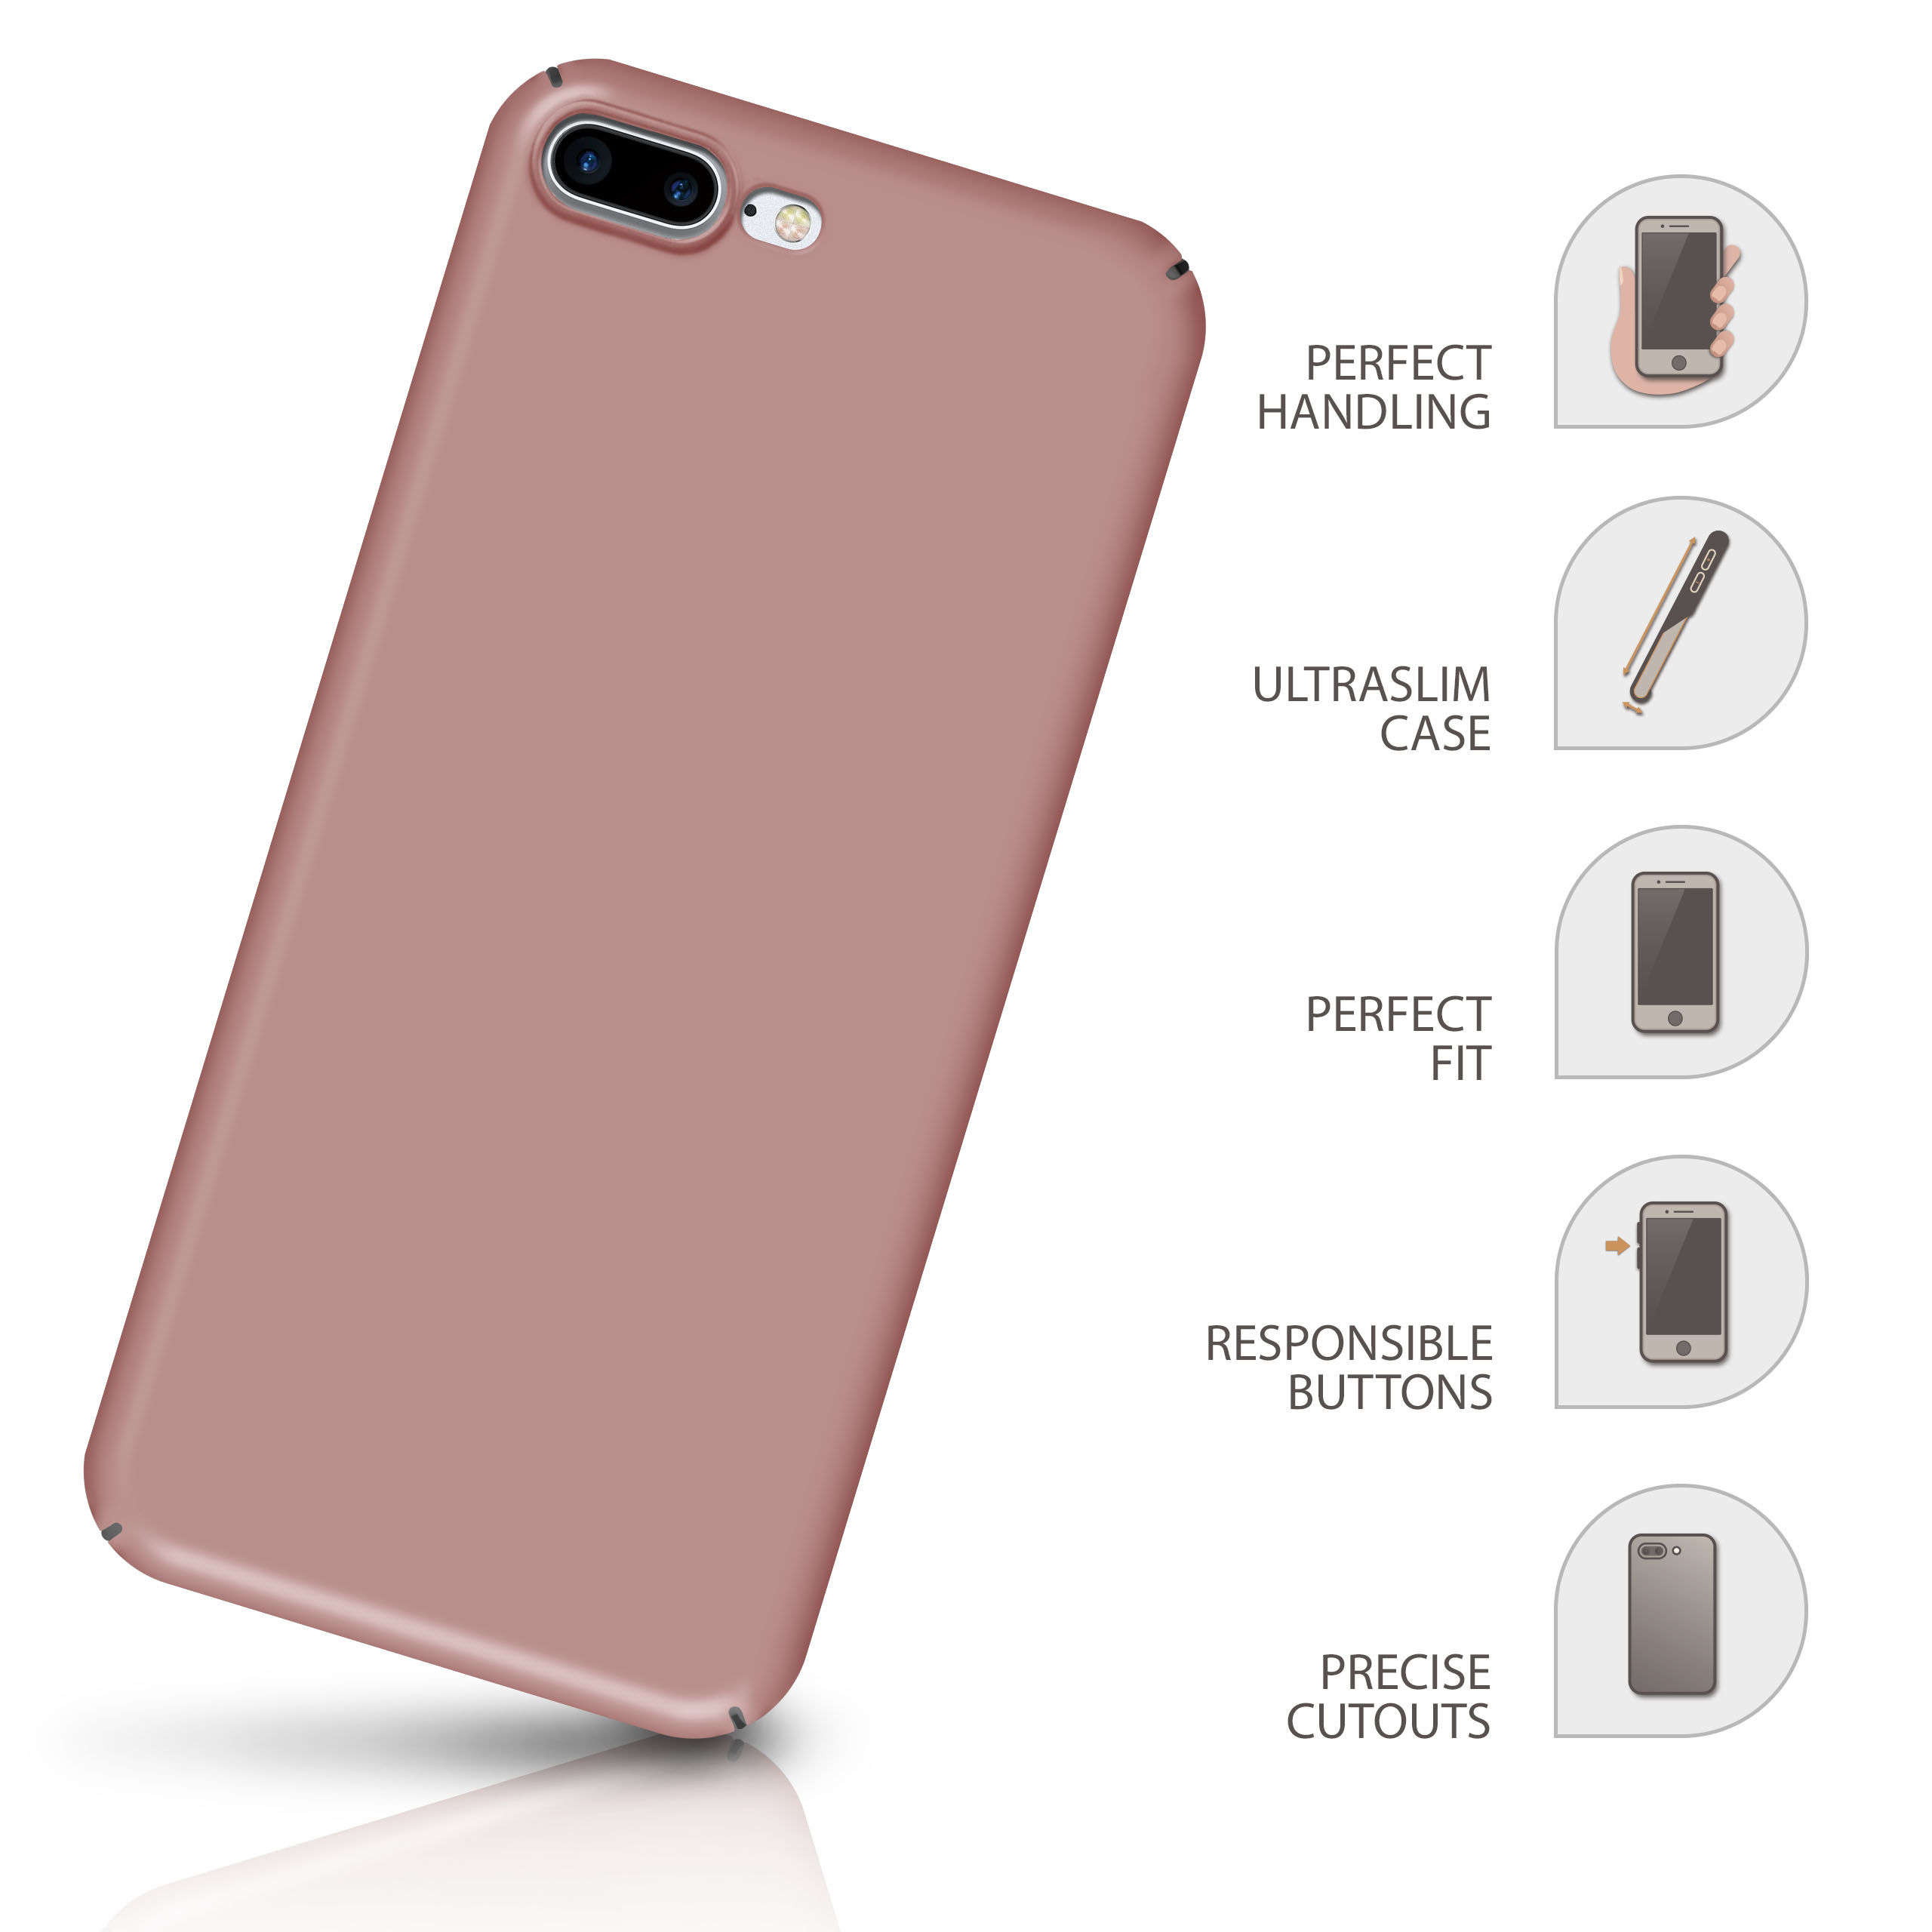 MOEX Alpha Backcover, 8 / iPhone Case, Plus Gold iPhone Rose 7 Apple, Plus